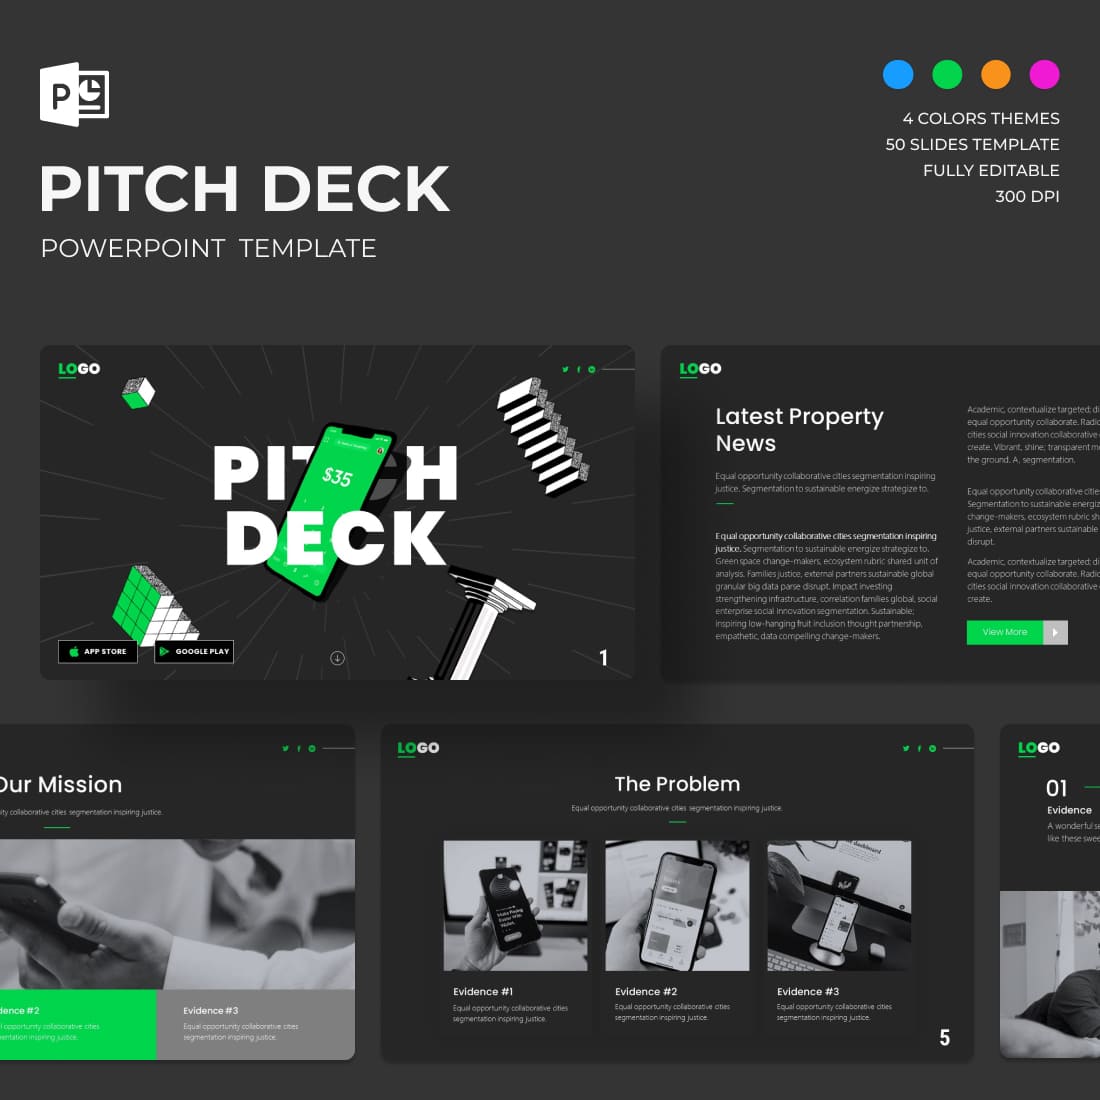 Mobile App Pitch Deck Powerpoint Template.